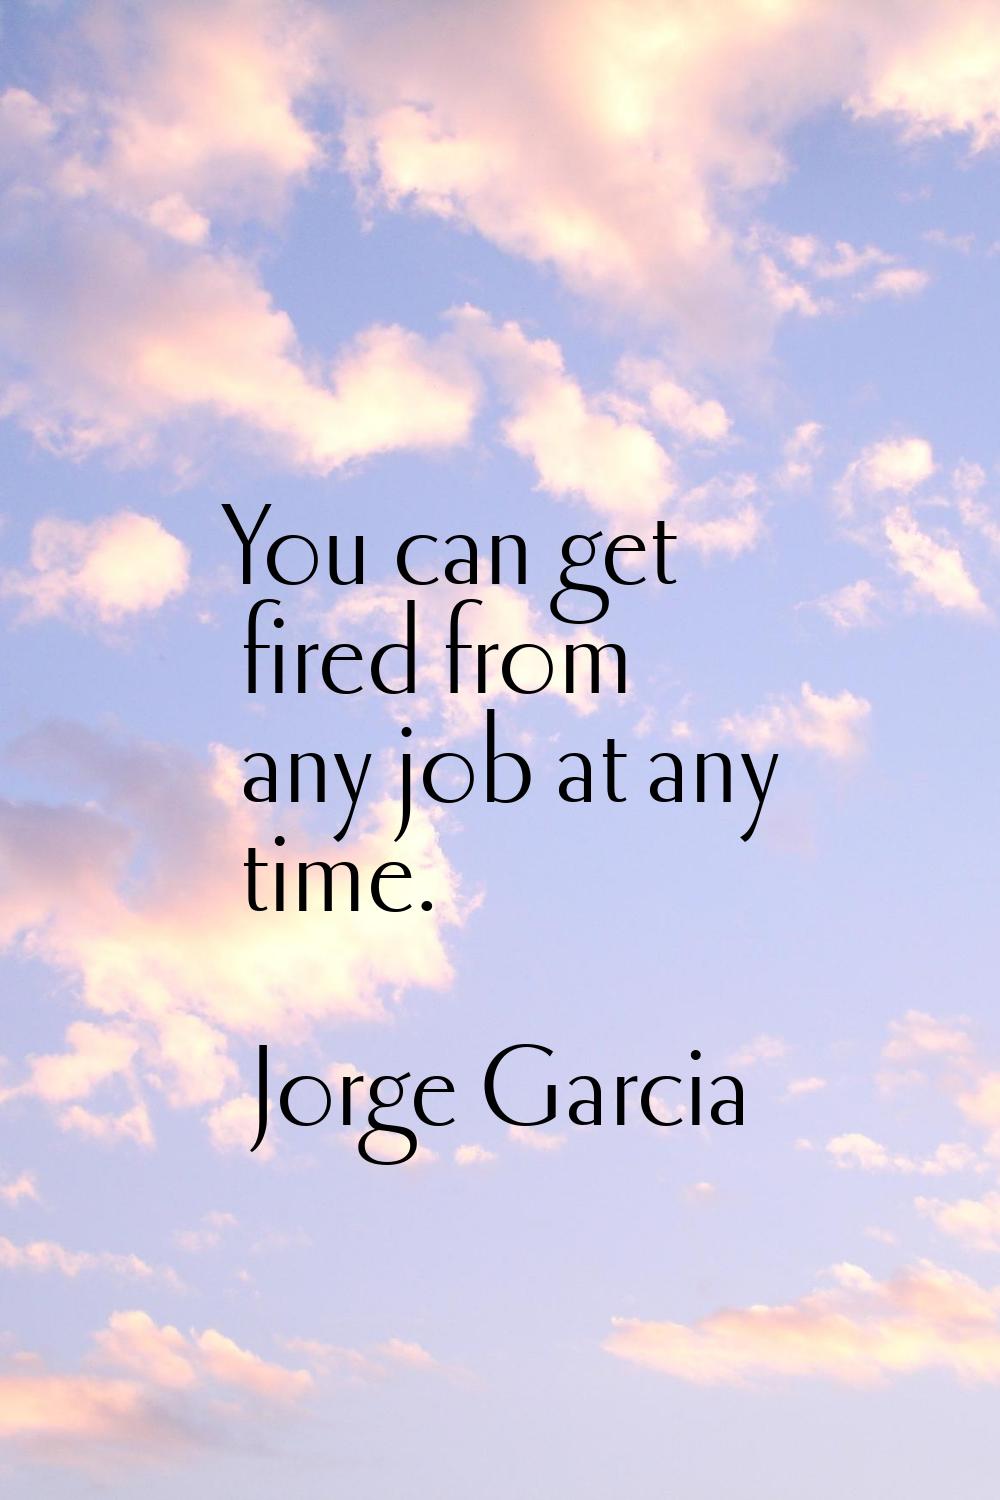 You can get fired from any job at any time.